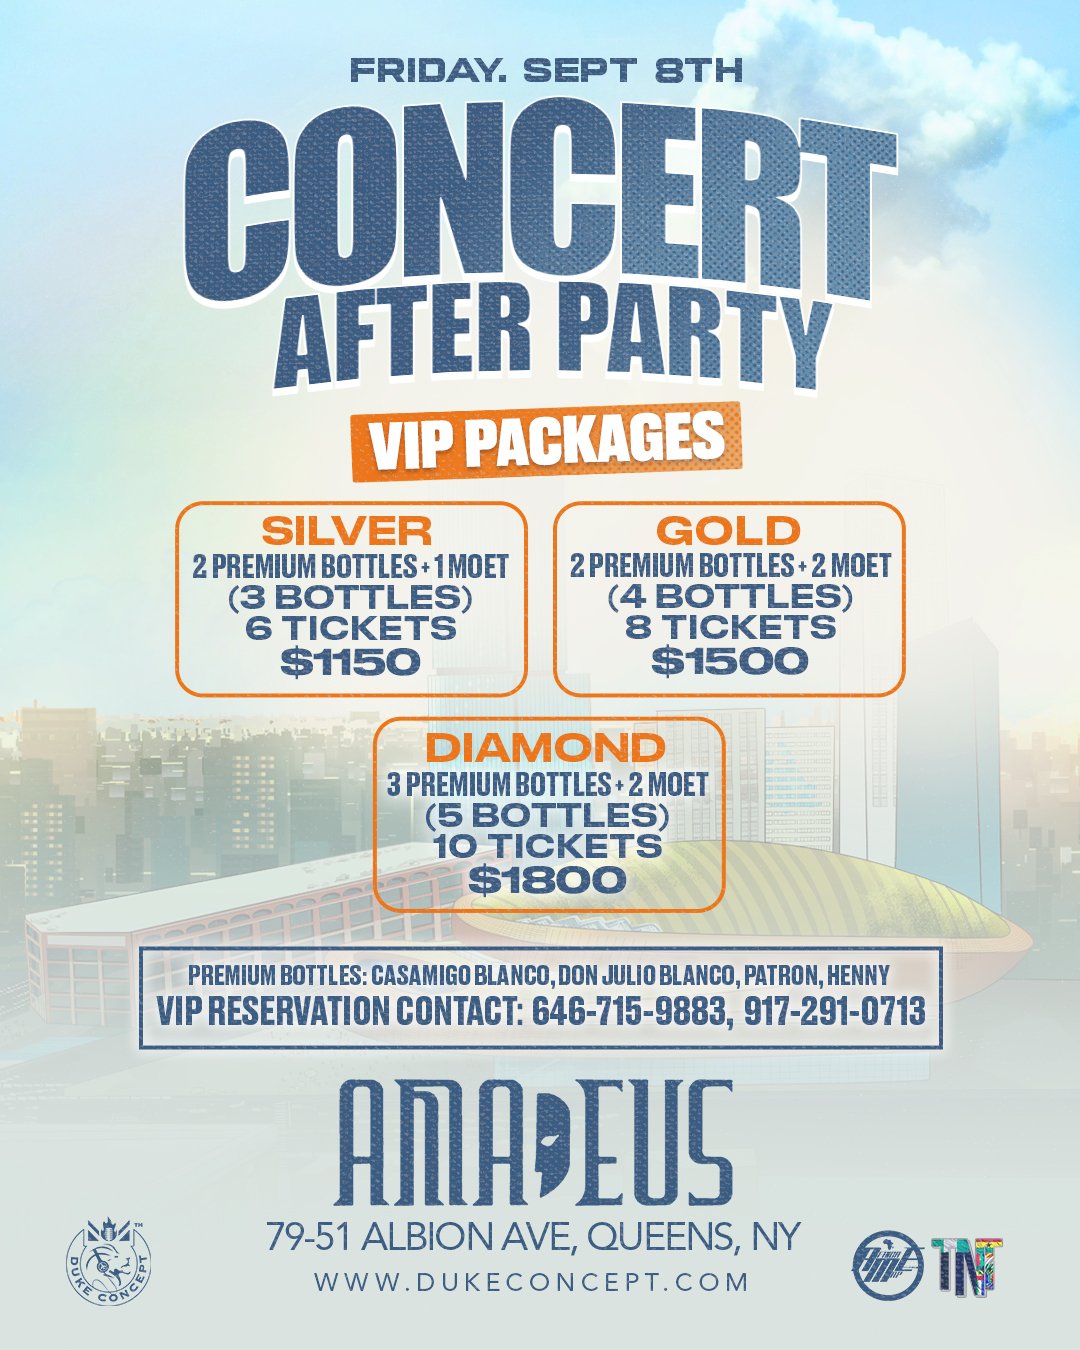 asake concert after party vip packages.jpg